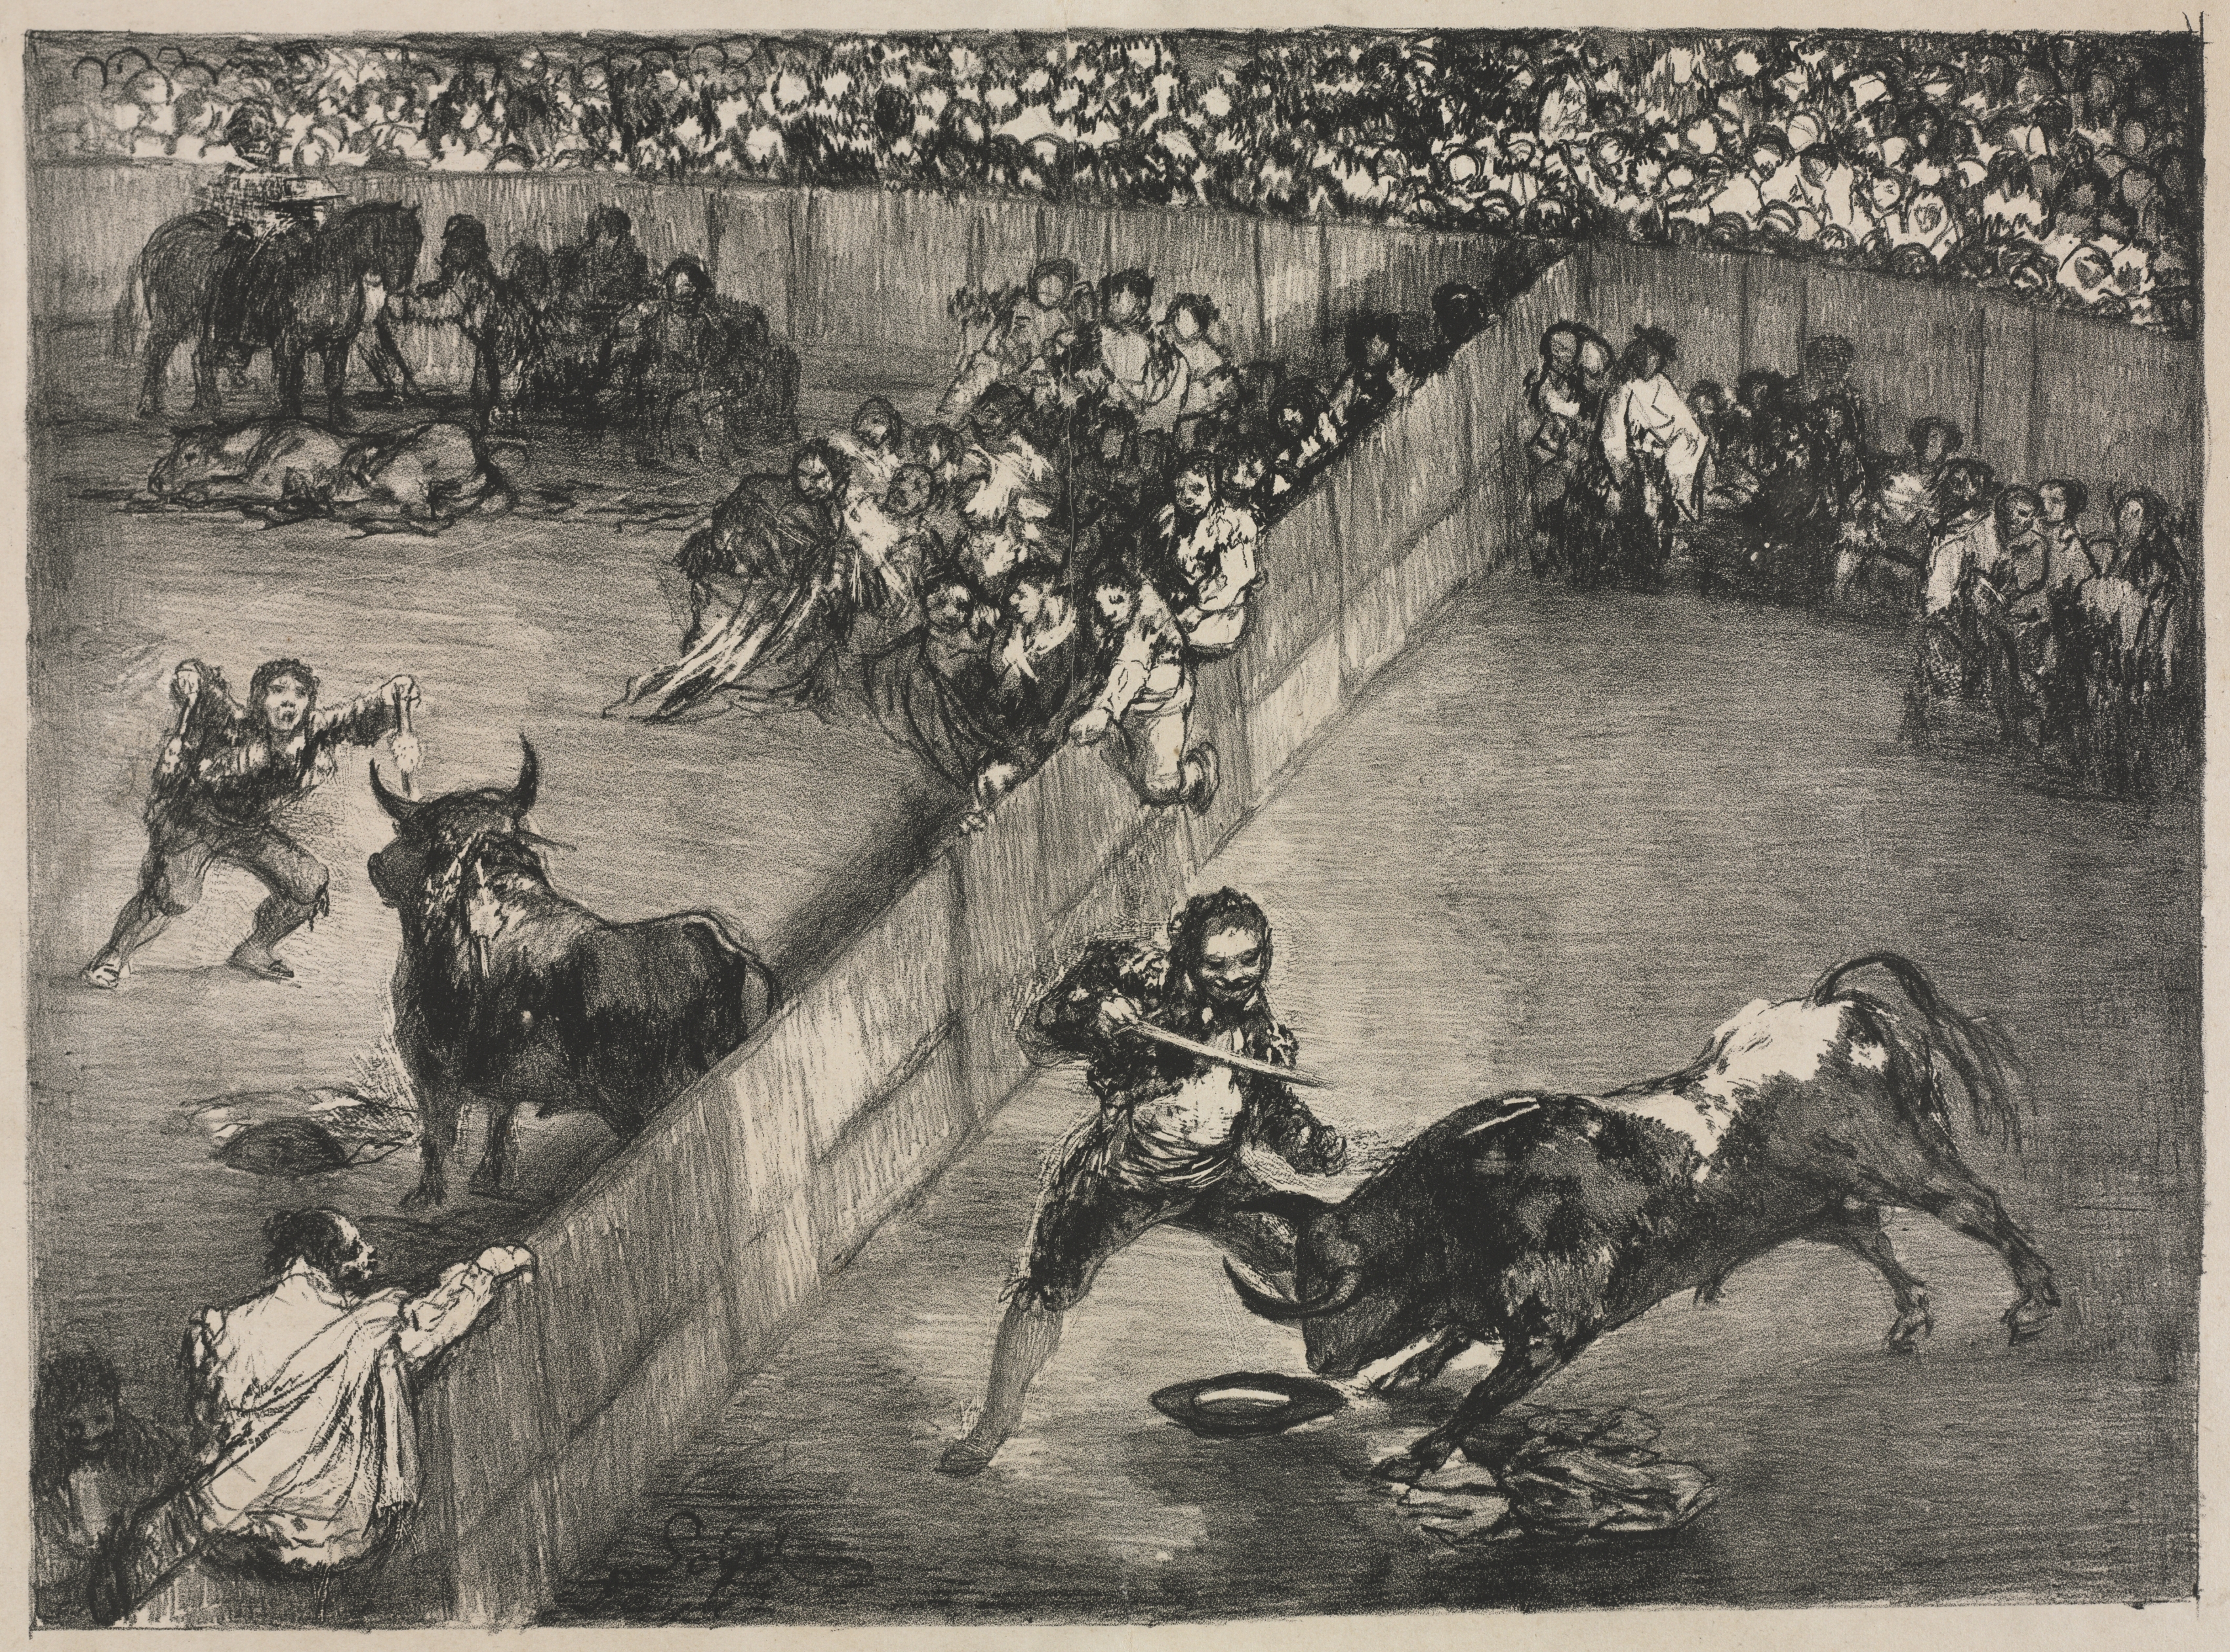 The Bulls of Bordeaux:  Bullfight in a Divided Ring